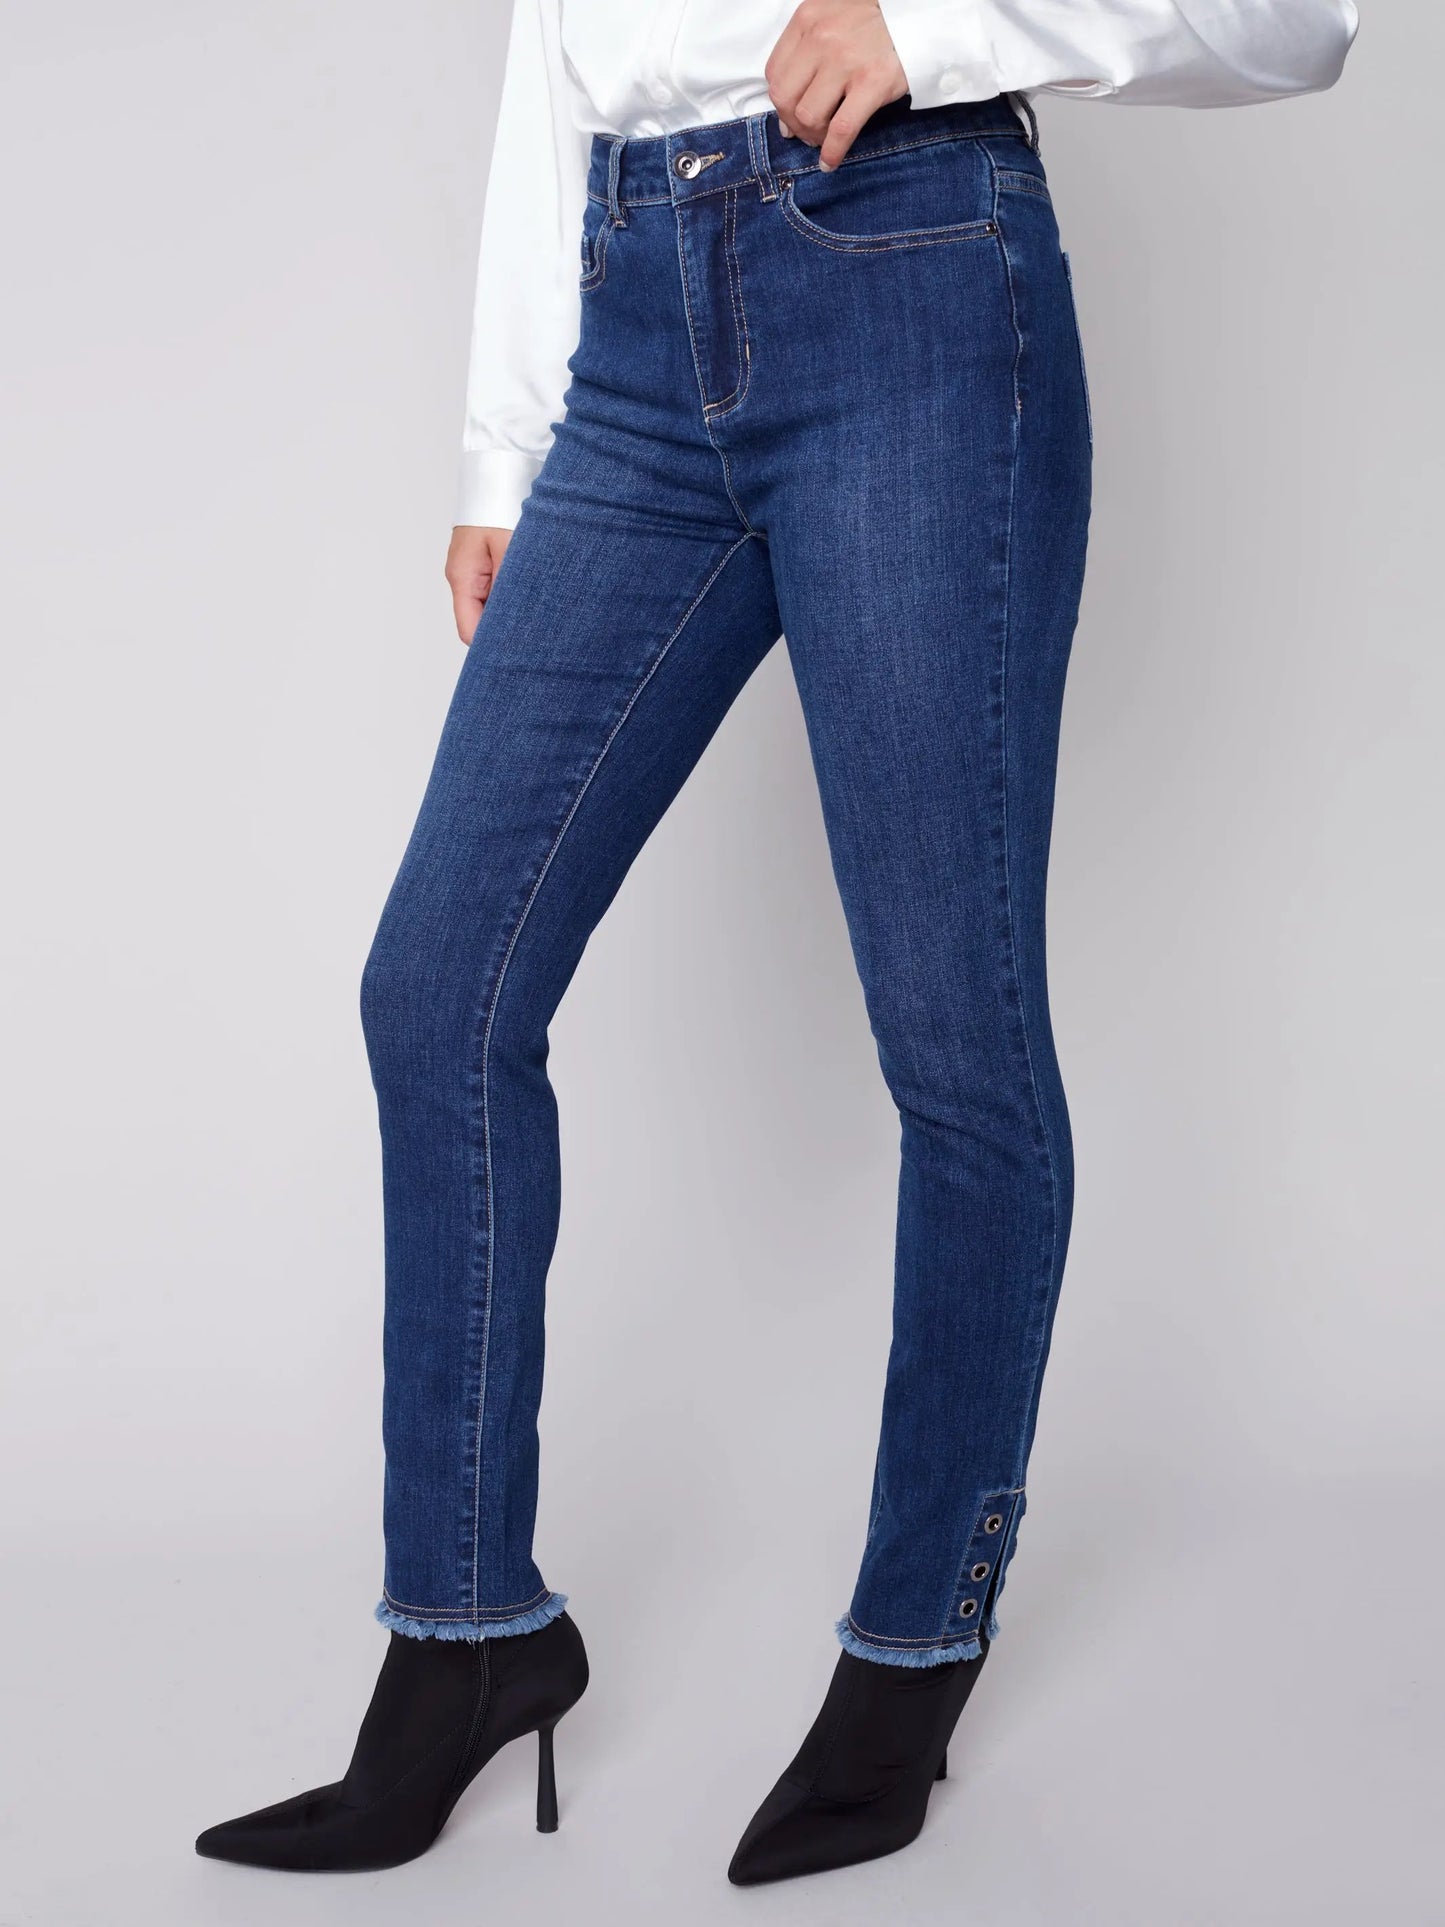 The model is wearing Charlie B white frayed bottom eyelet jeans.